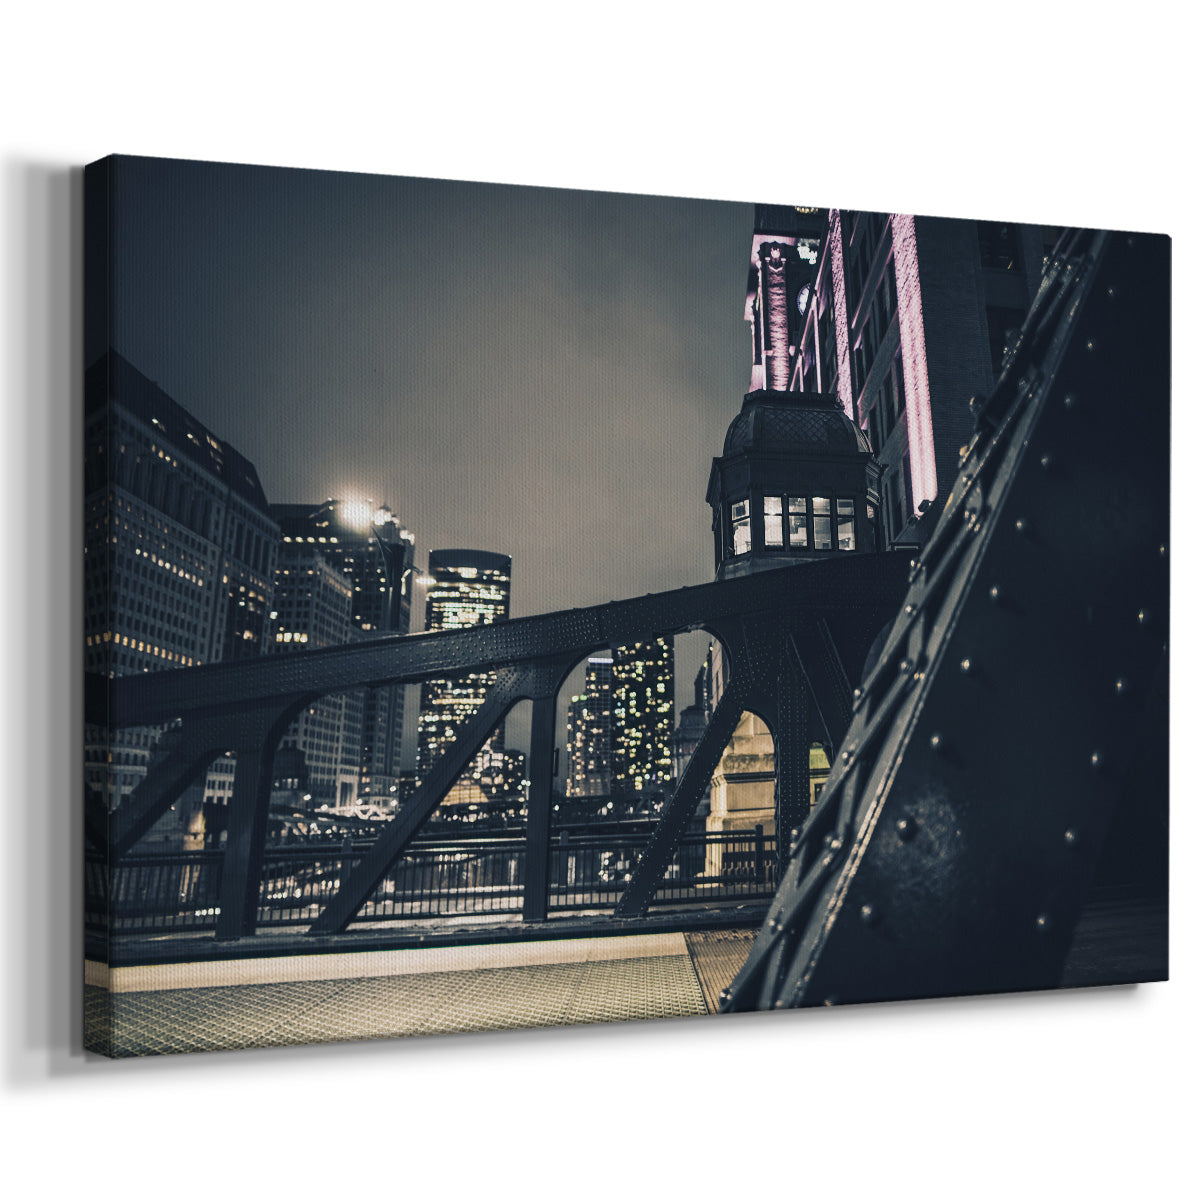 Chicago River at Night IV - Gallery Wrapped Canvas